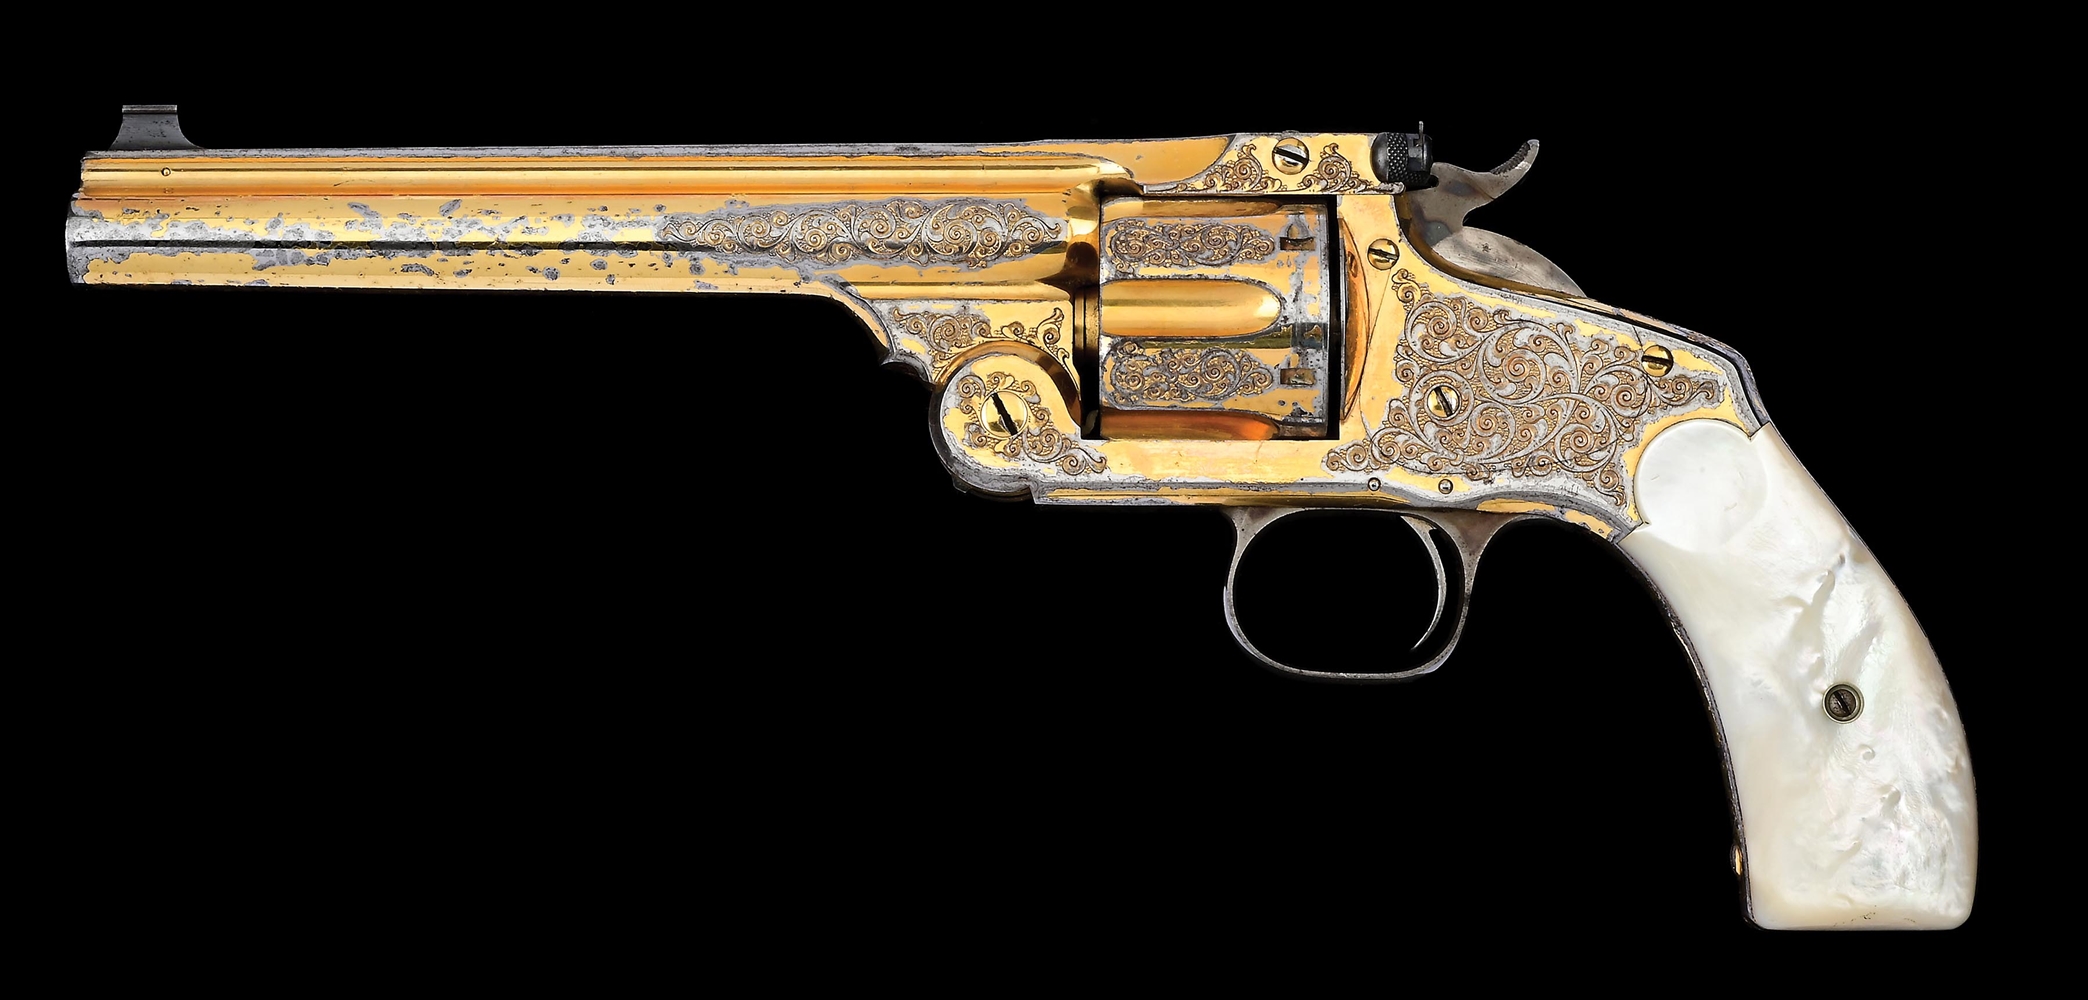 (A) FACTORY GOLD PLATED & ENGRAVED SMITH & WESSON NEW MODEL NO. 3 SINGLE ACTION REVOLVER WITH FACTORY LETTER & MOTHER OF PEARL GRIPS.